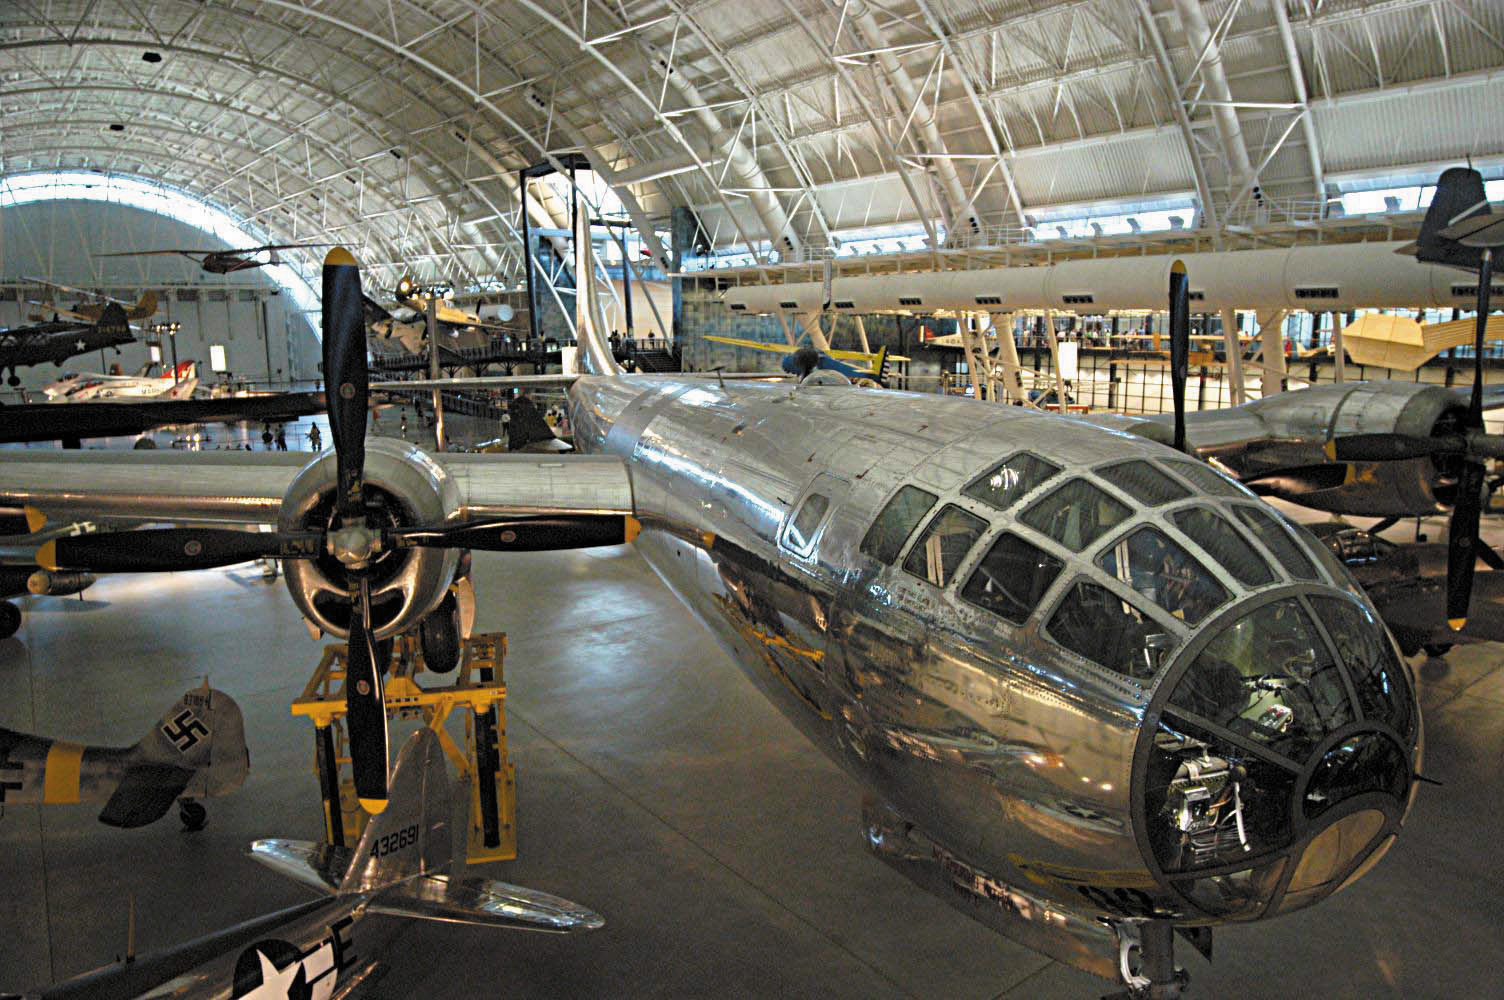 The gleaming Boeing B-29 bomber Enola Gay occupies a prominent space in the hangar at the Smithsonian Air & Space Museum in Chantilly, Va.